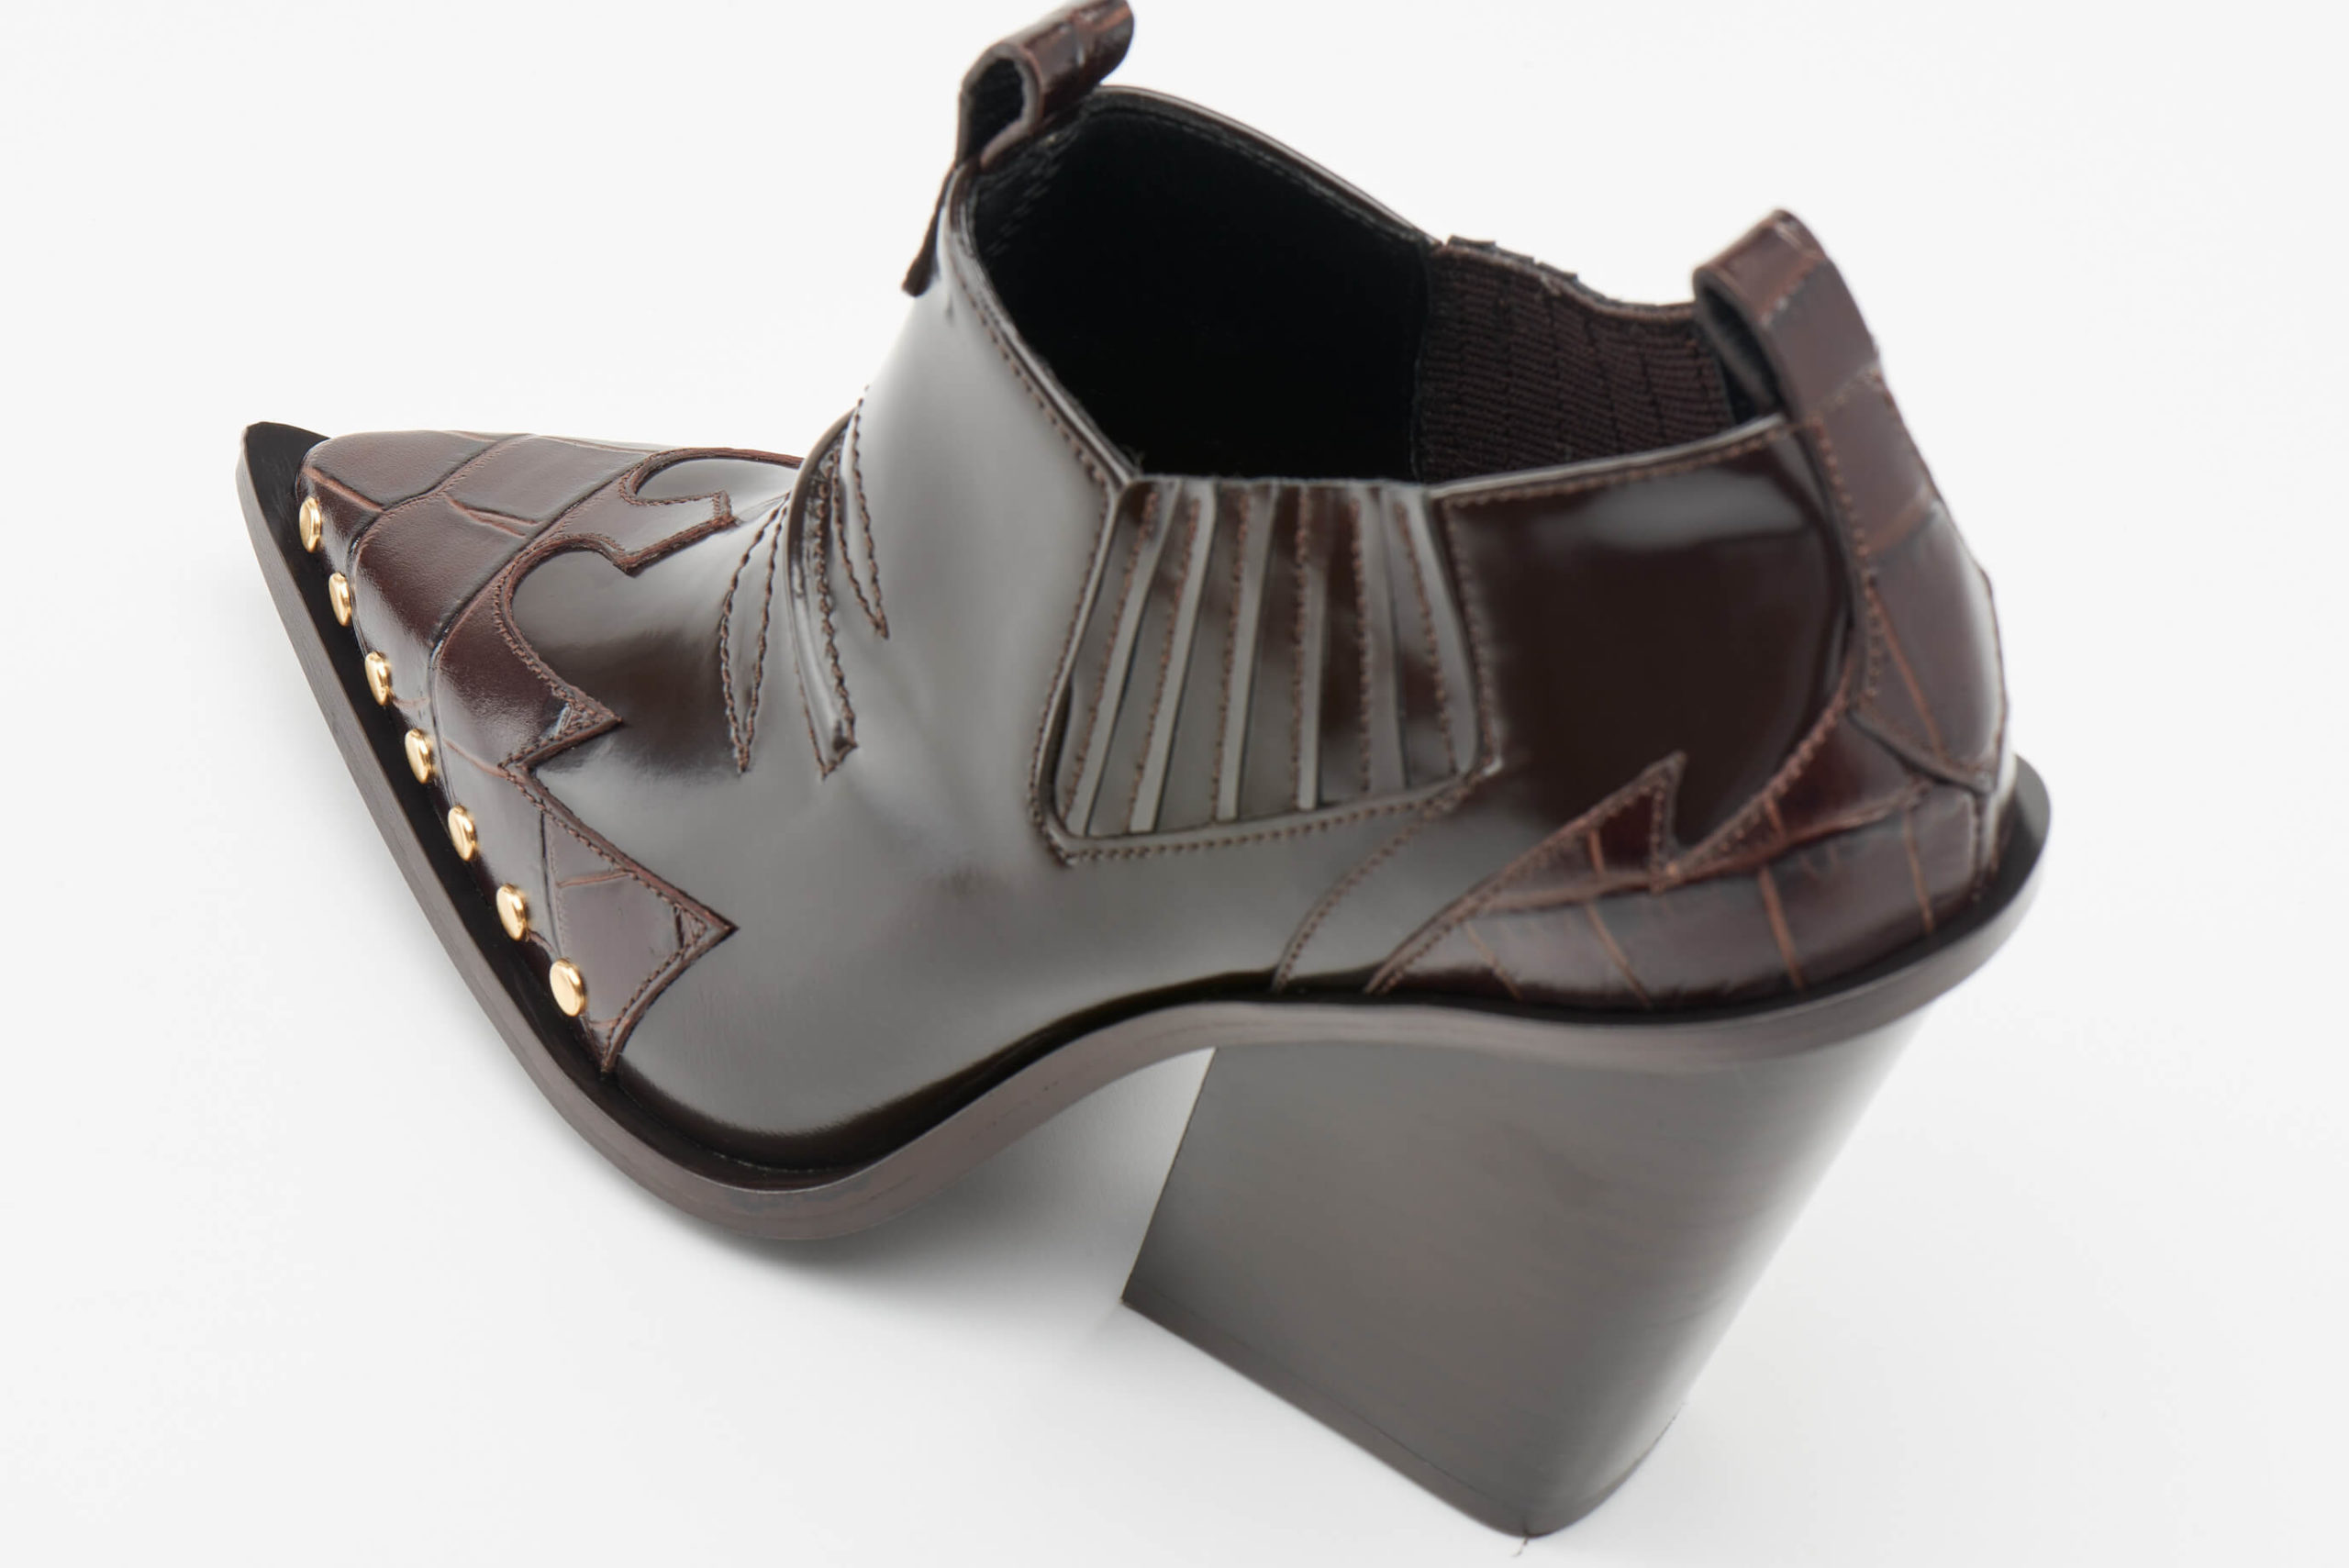 Luis Onofre Portuguese Shoes FW22 – 5271_01 – Pharisee-6